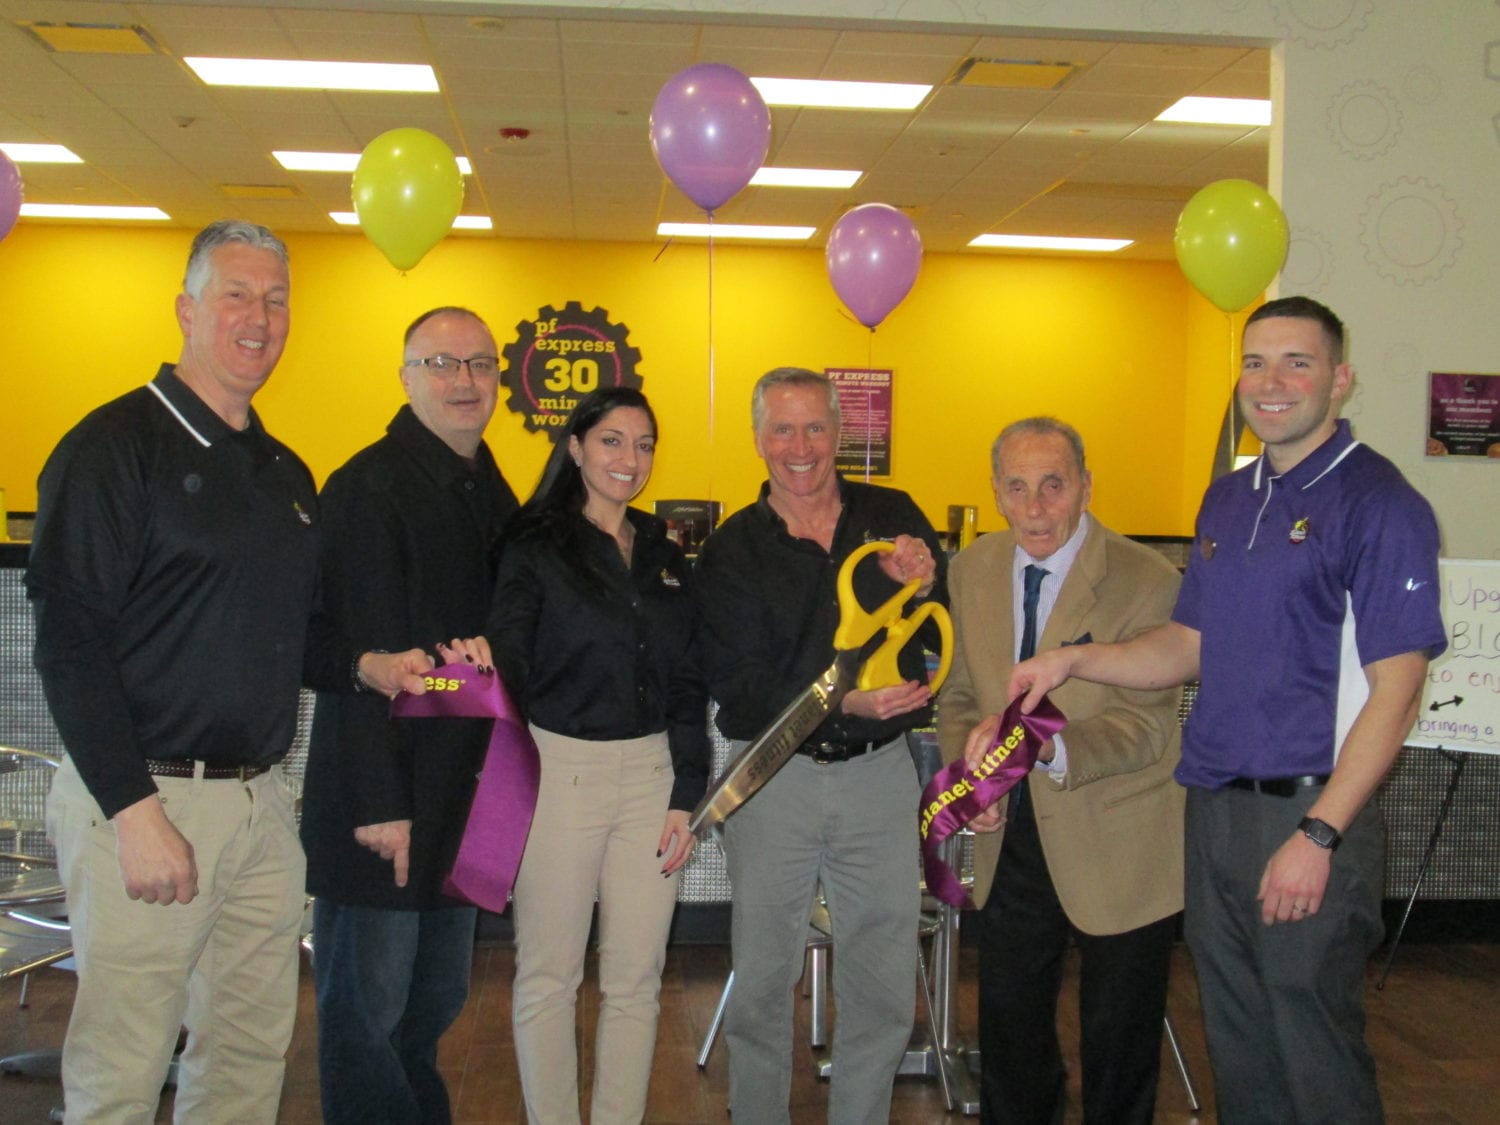 Planet Fitness opens location in Hauppauge | TBR News Media